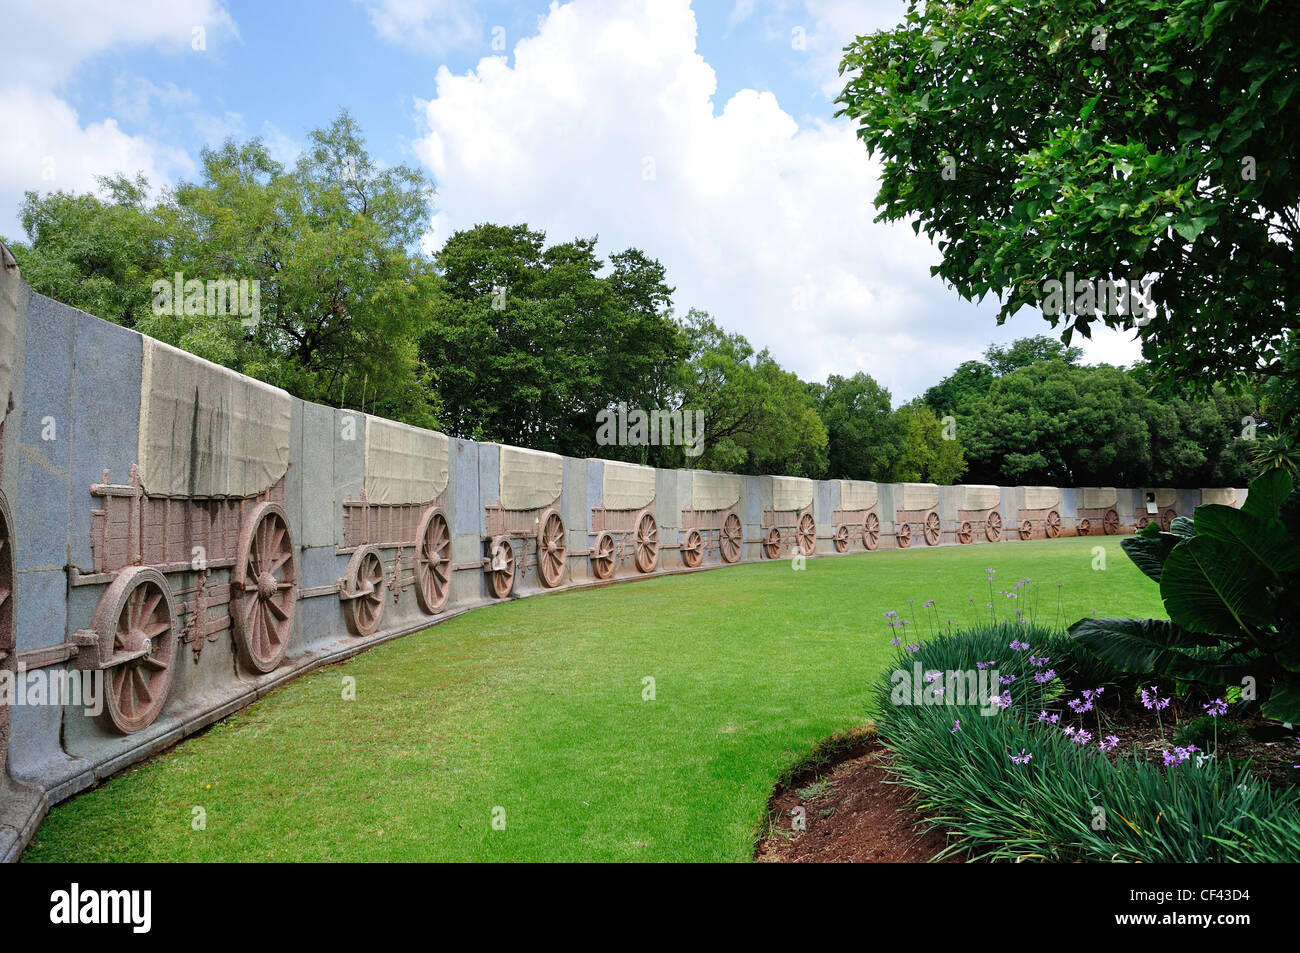 The wagon laager wall at The Voortrekker Monument, Pretoria, Gauteng Province, Republic of South Africa Stock Photo